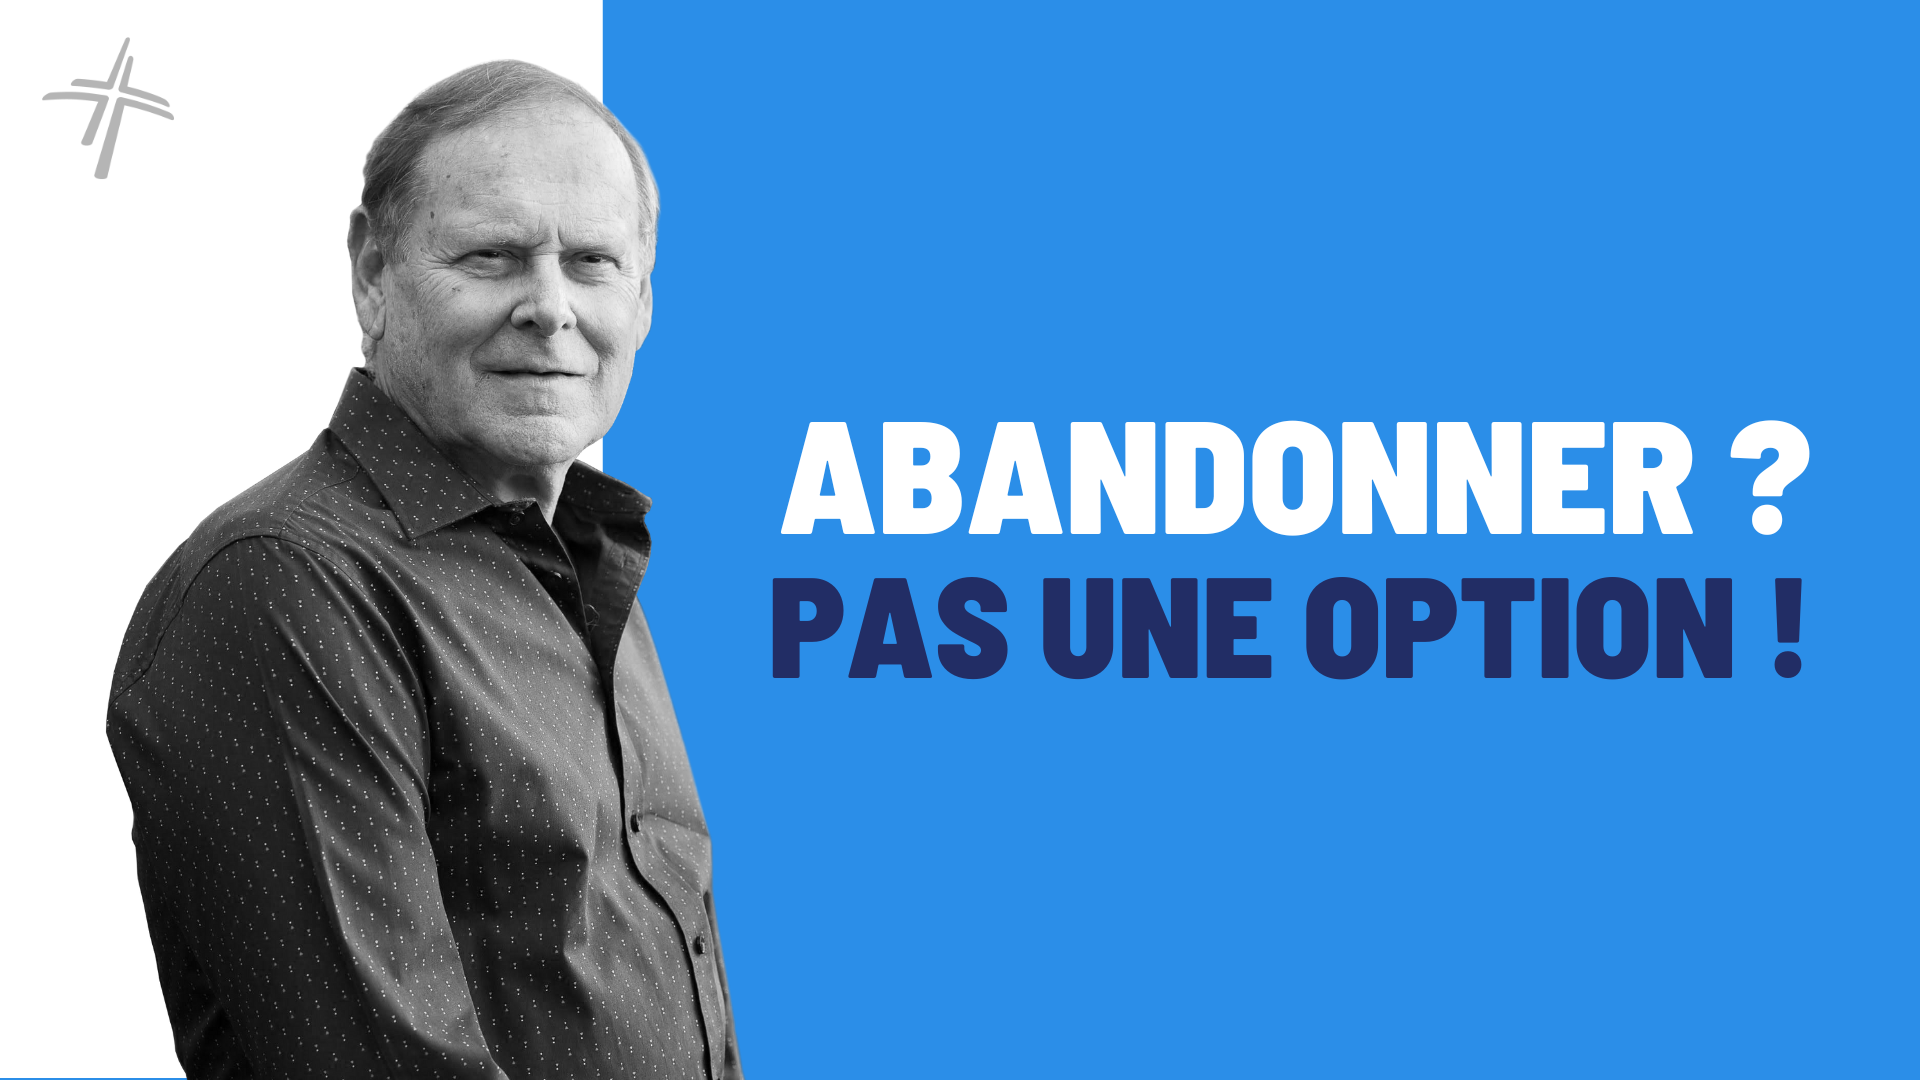 Featured image for “Abandonner ? Pas une option !”